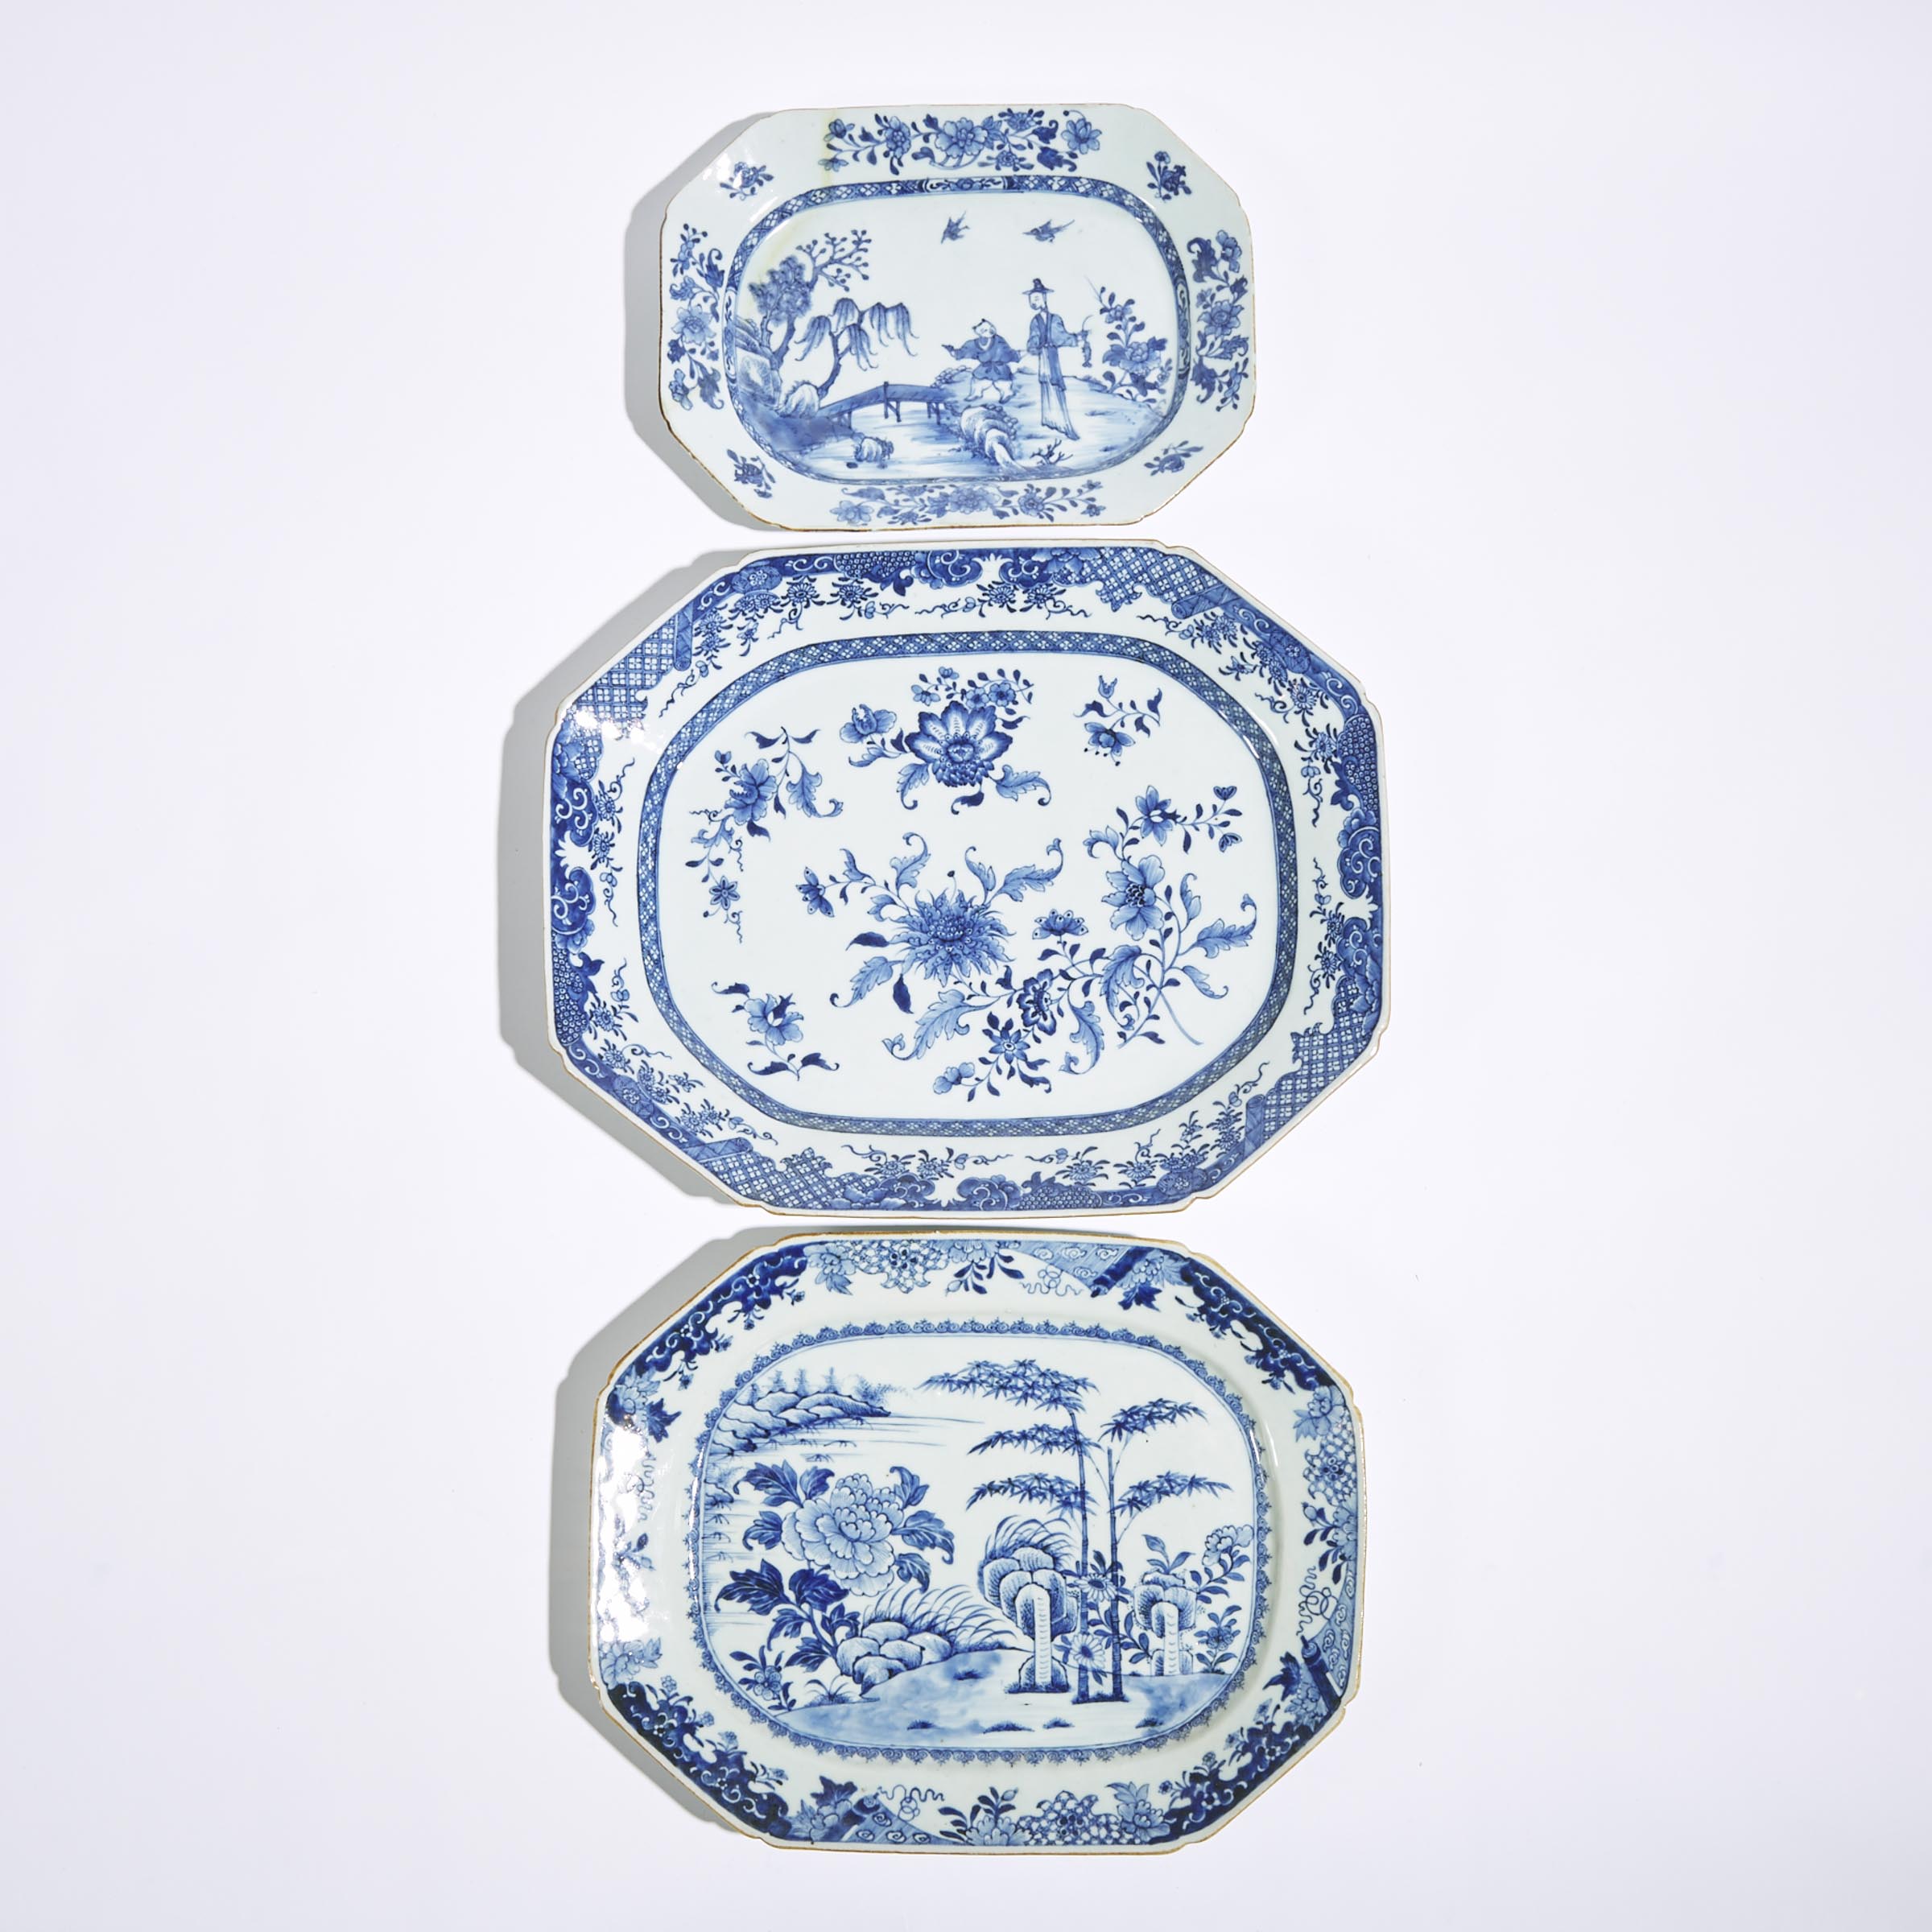 A Group of Three Export Blue and White Platters, 18th Century